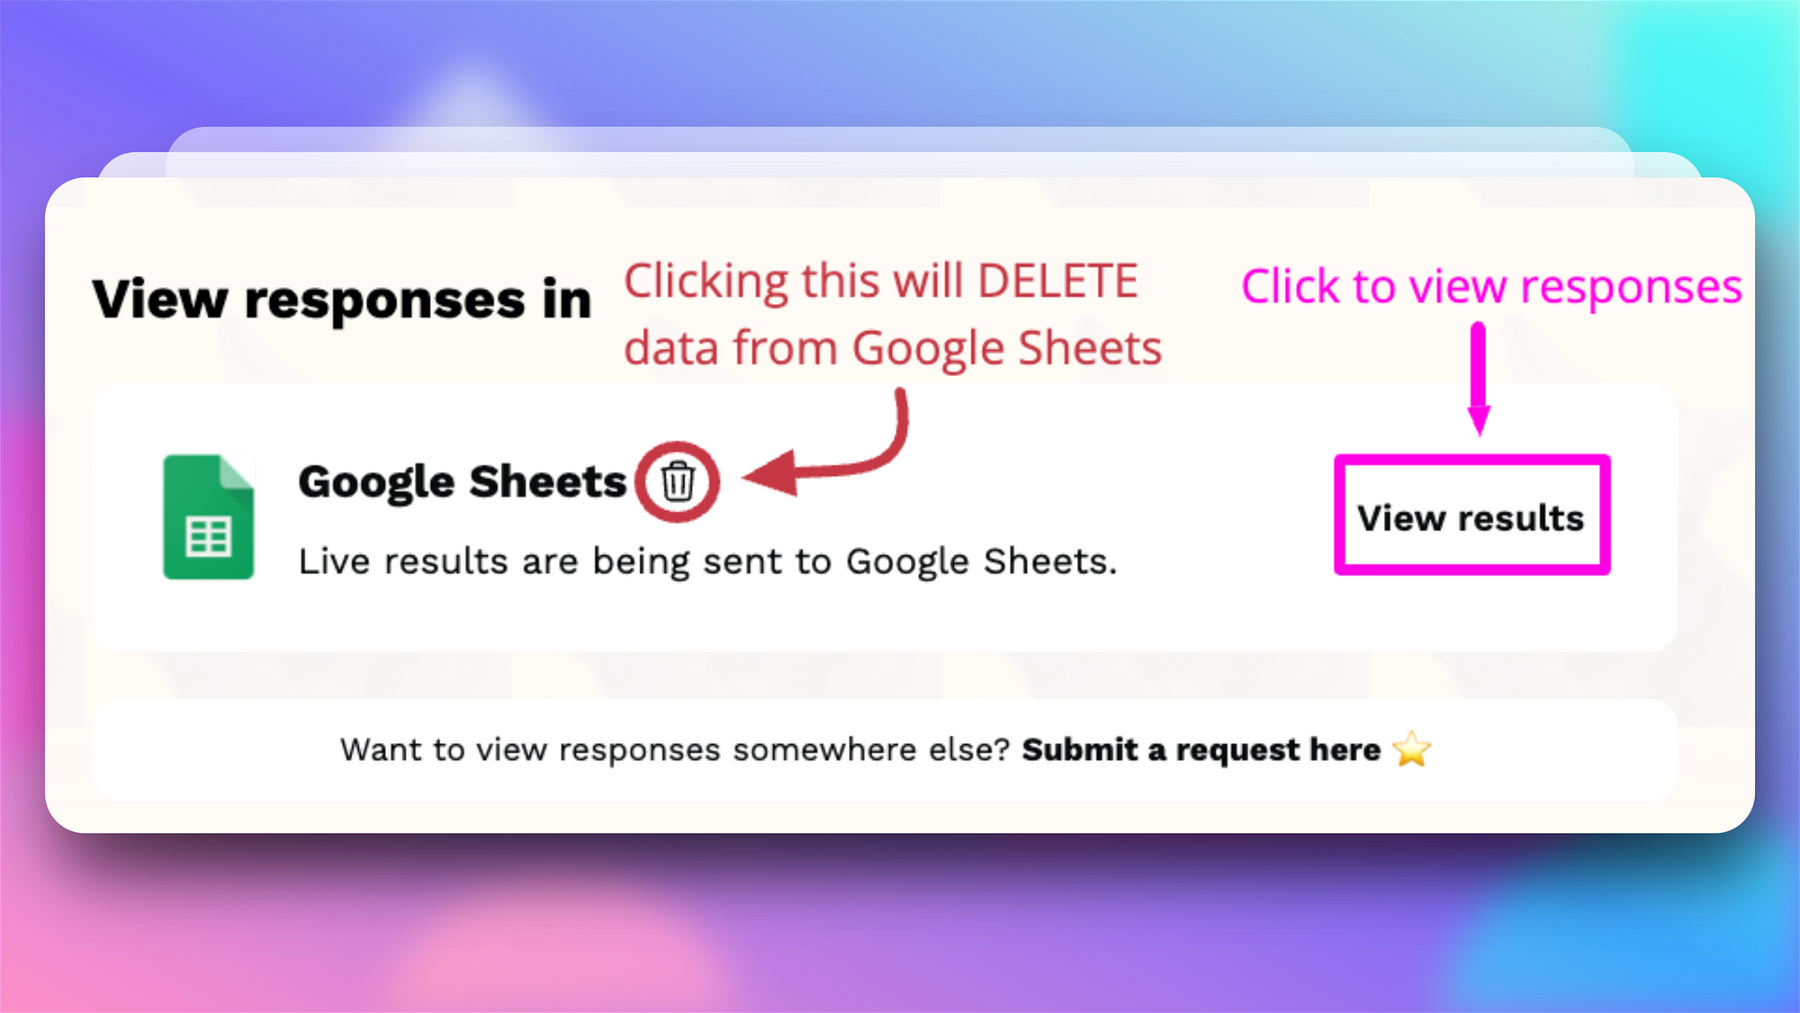 After connecting your Google account, click the View results button to view live results of the responses on Google Sheets. You can also delete the data from Google Sheets by clicking the trash can icon twice.